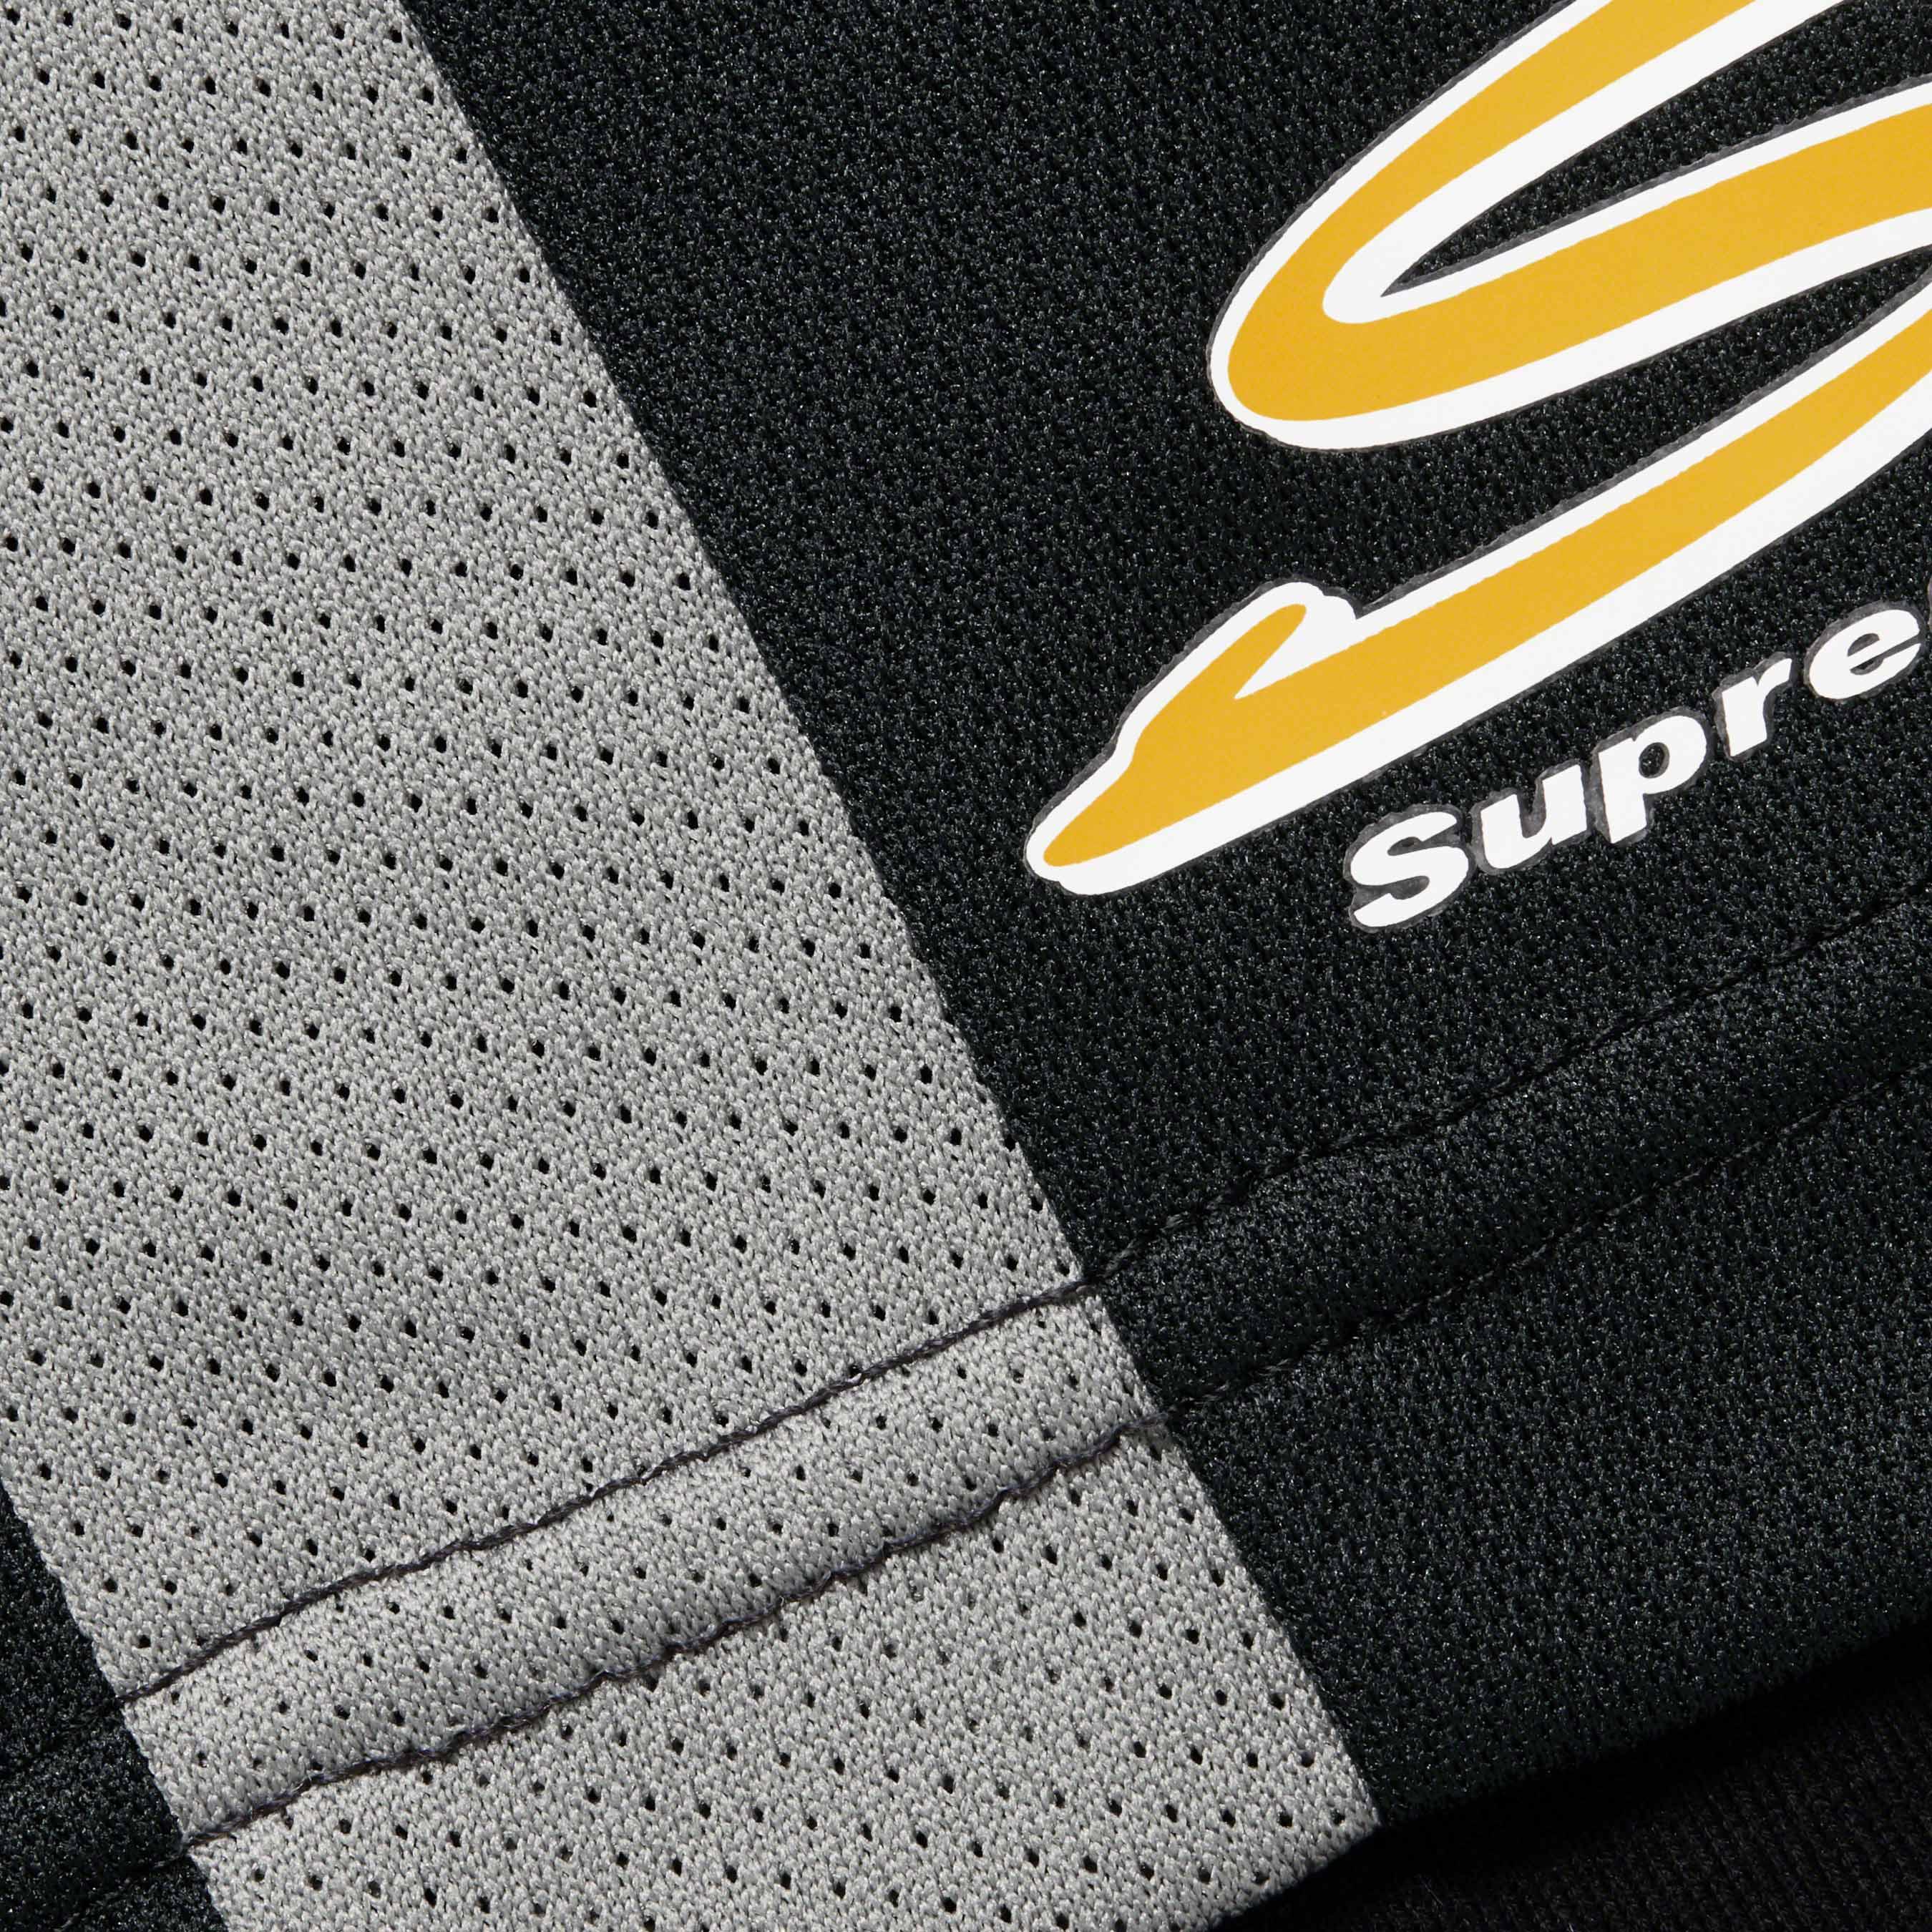 Hooded Soccer Jersey - fall winter 2023 - Supreme